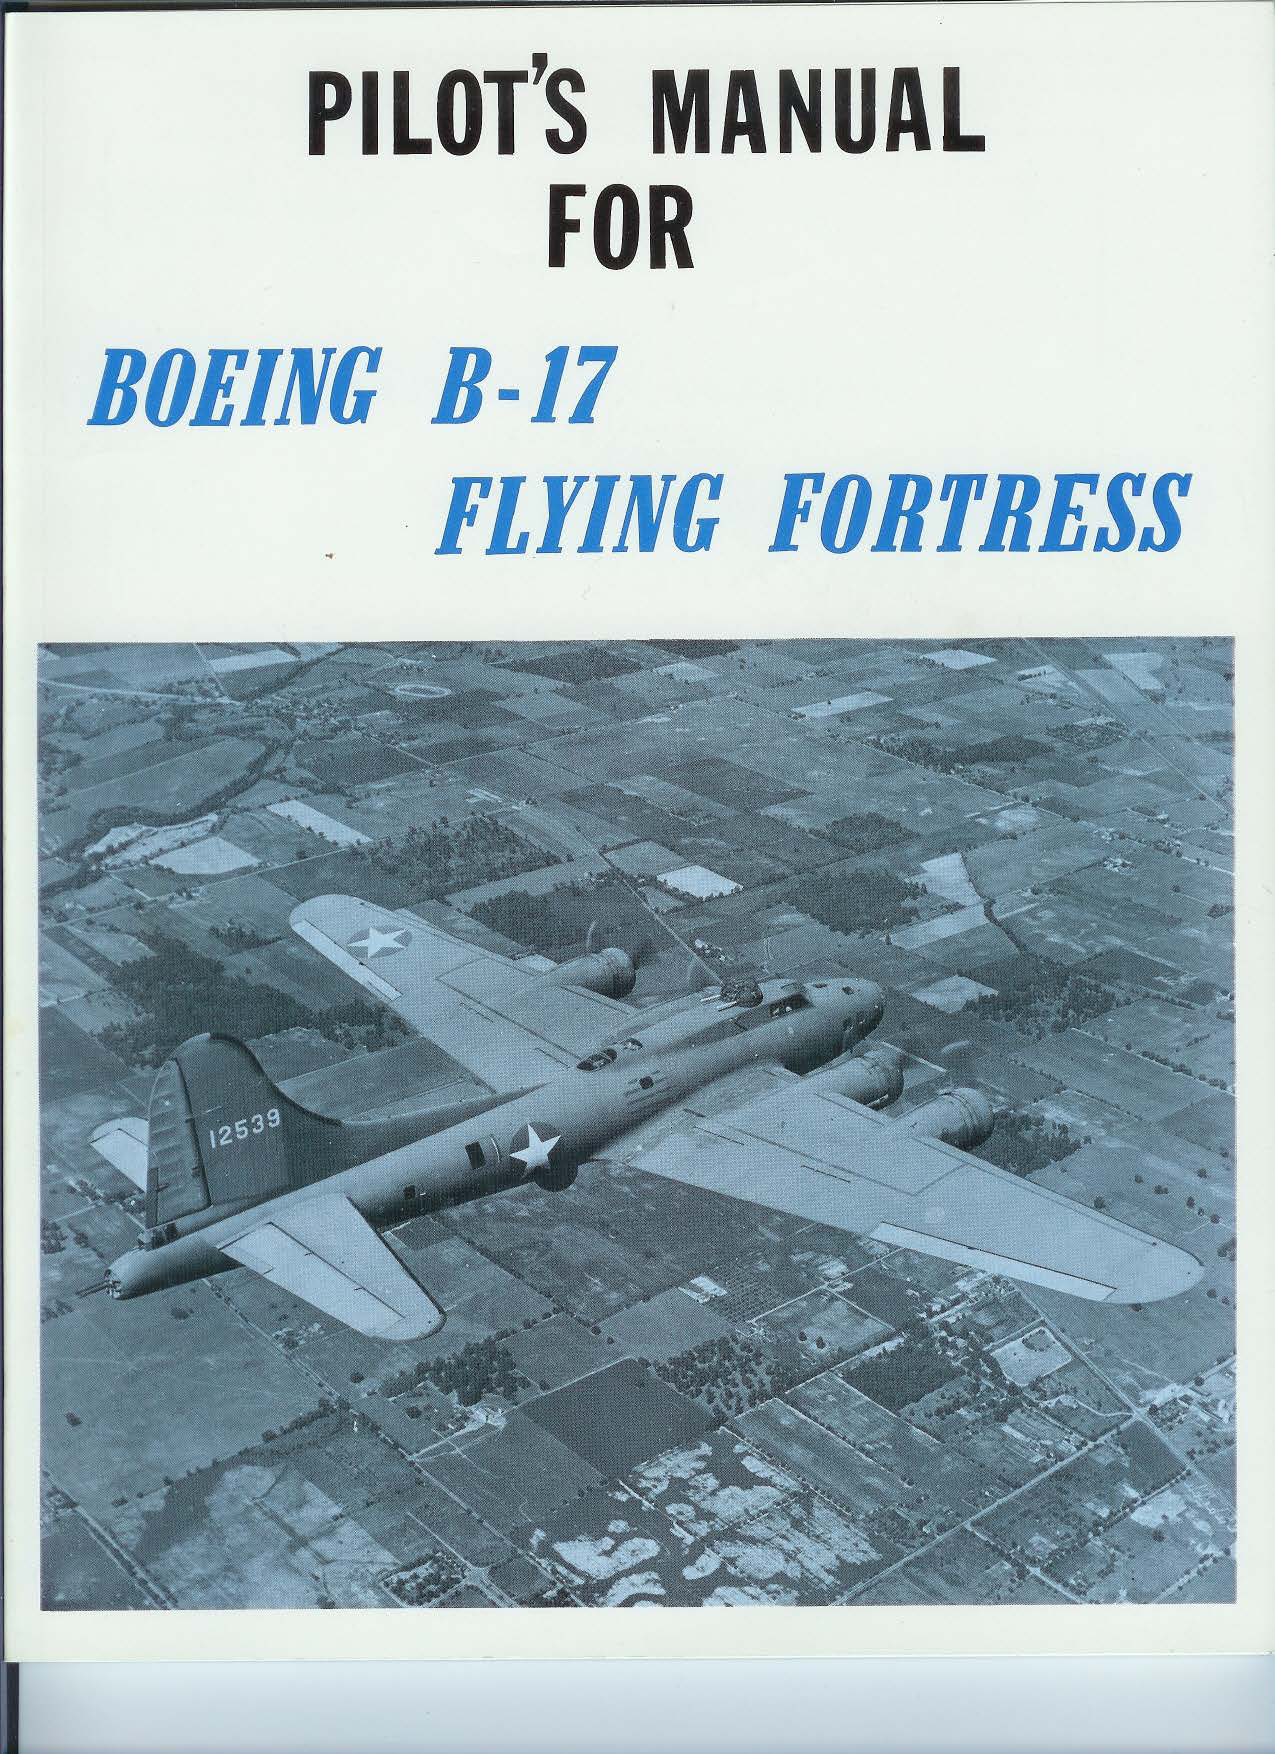 Sample page 1 from AirCorps Library document: Pilot's Manual for Boeing B-17 Flying Fortress